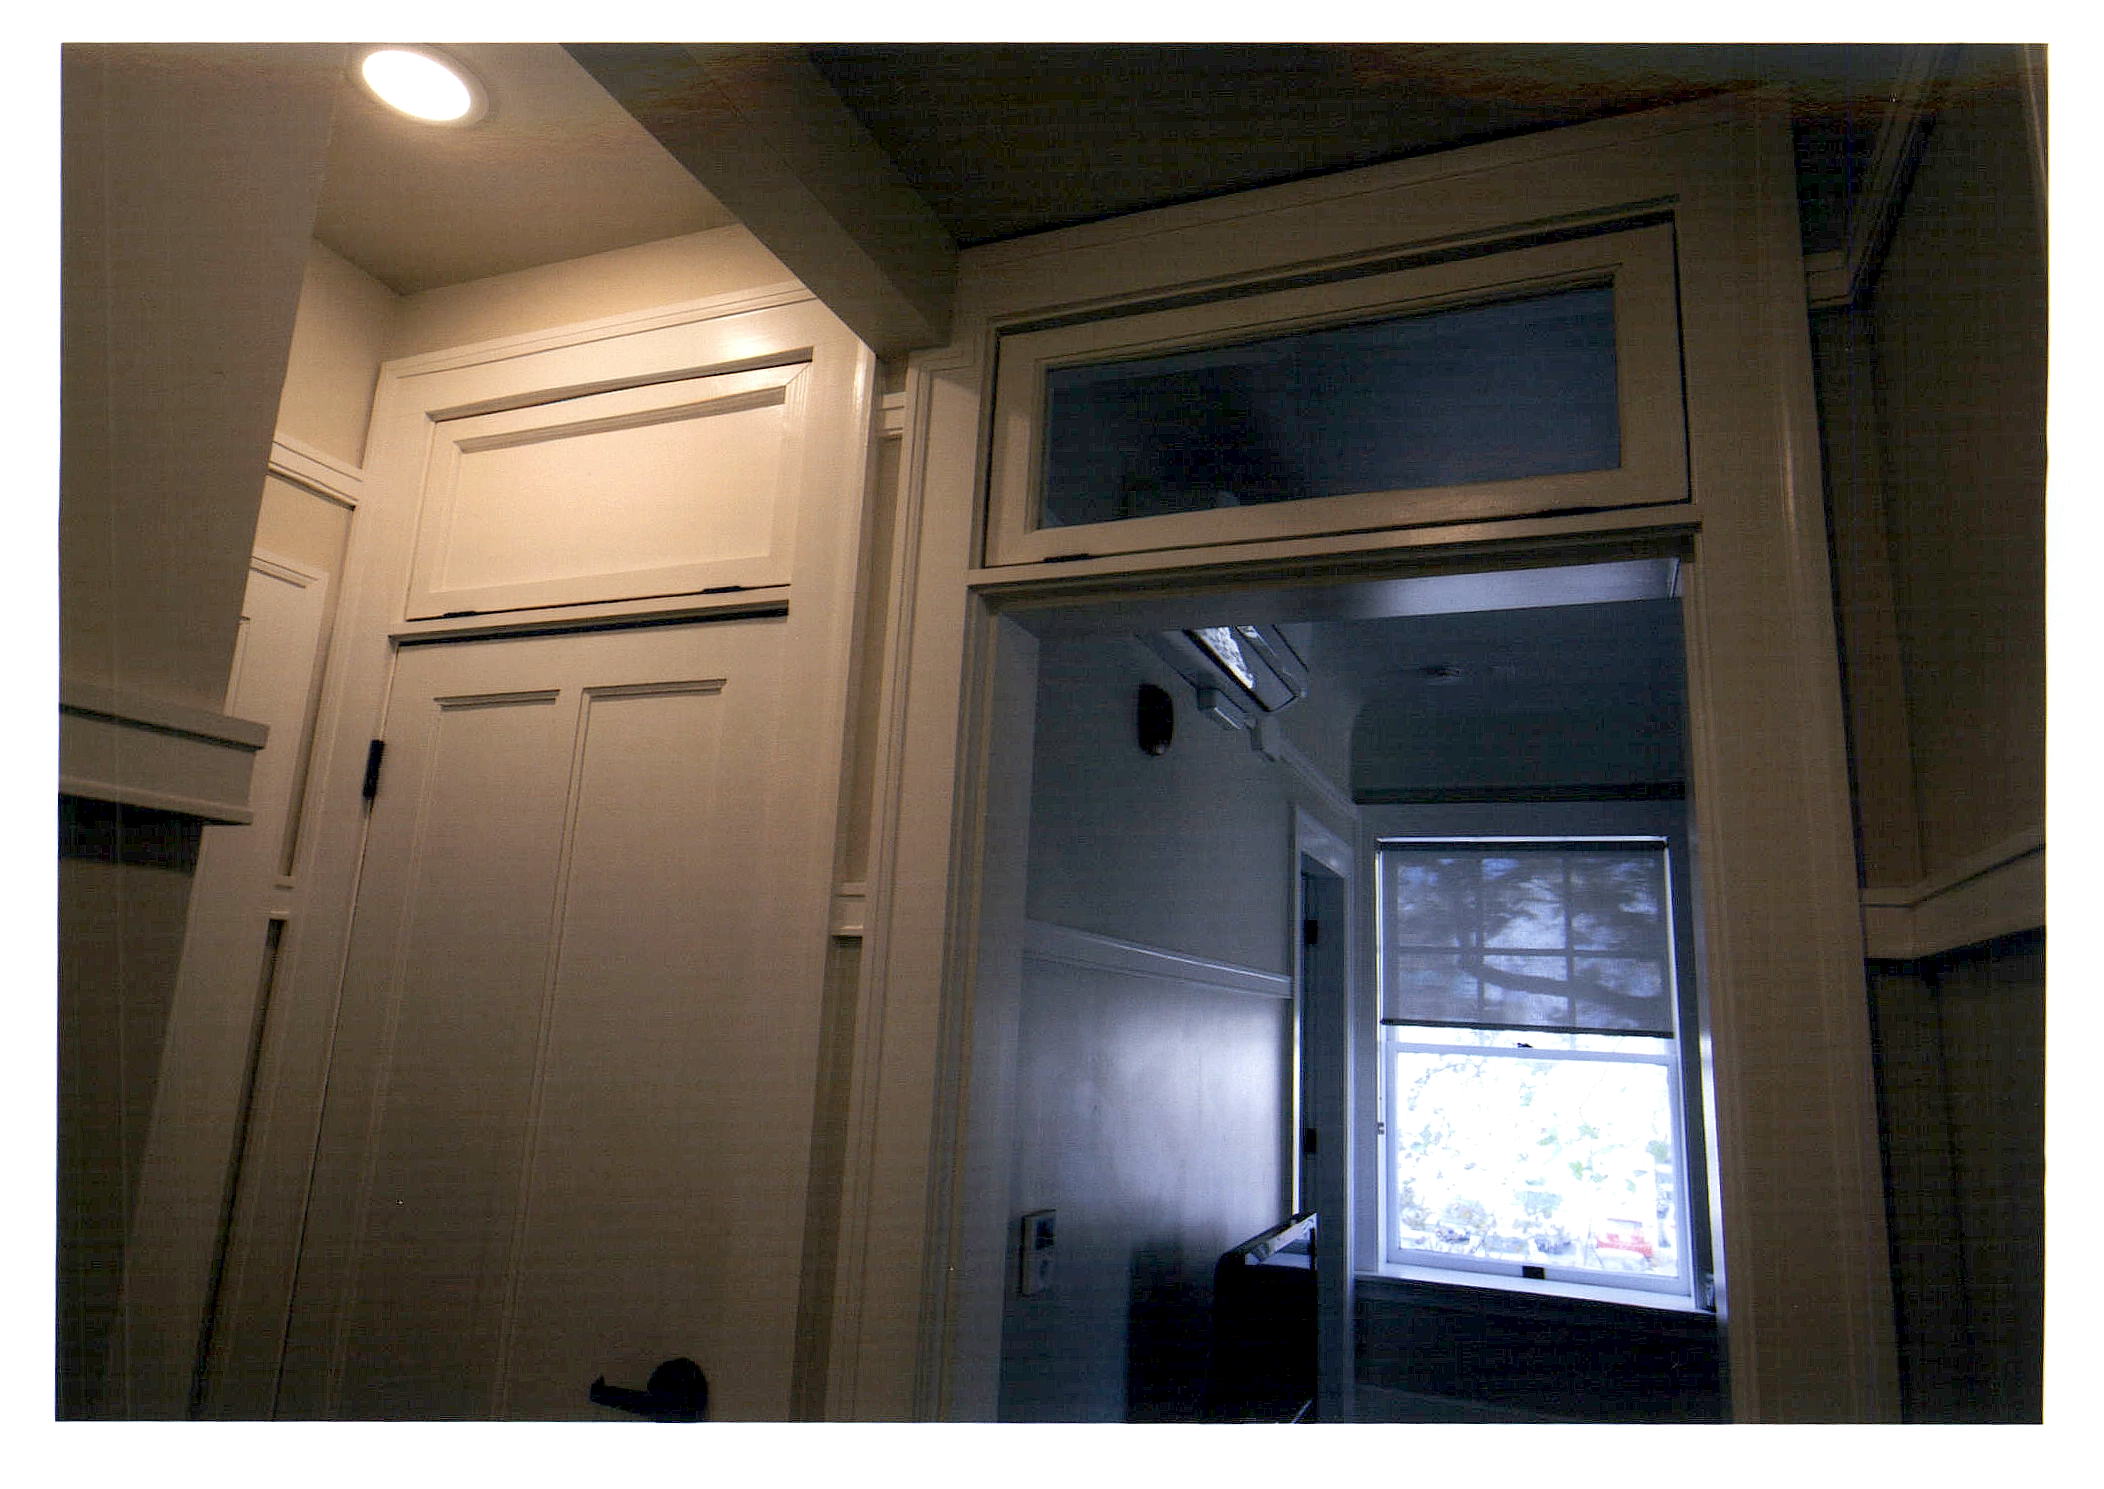 After: close-up of hallway showing apartment entrances.